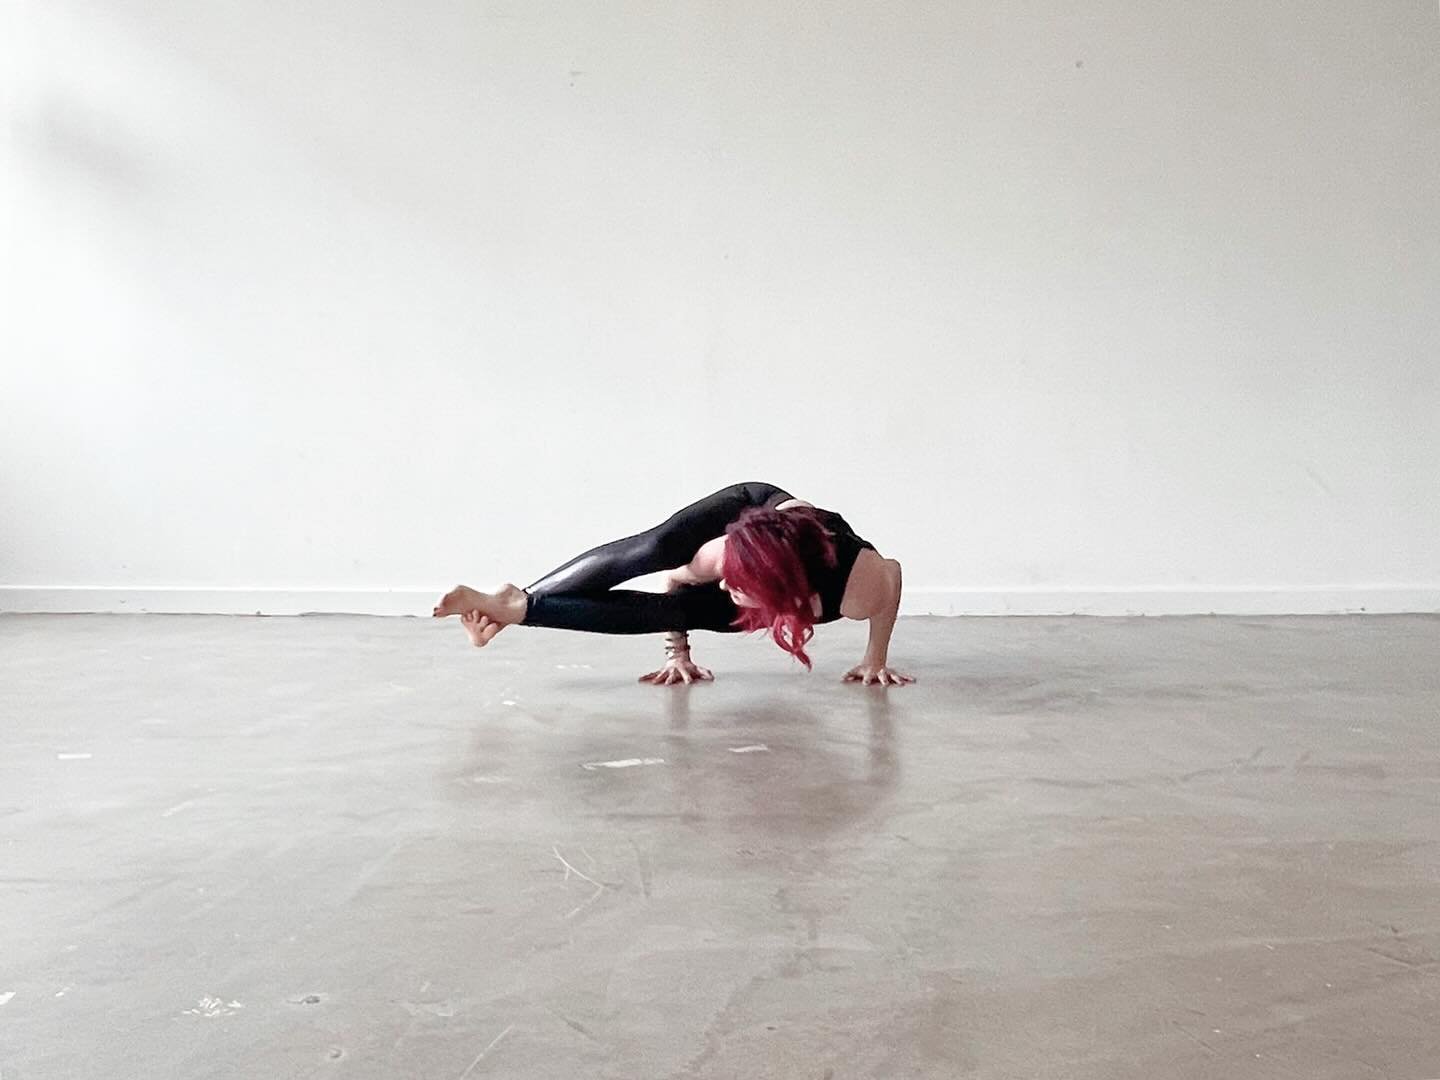 ***MONDAY***
We made it, parents! Back to school, back on the mat. 🤌🏻💫

Join me today for a deep and delicious Slow Flow @yogaontheedgeuk 09:30 (1 space left)

OR

Dynamic and also delicious Vinyasa! 19:30 @substation.macclesfield 

Book via @omyo